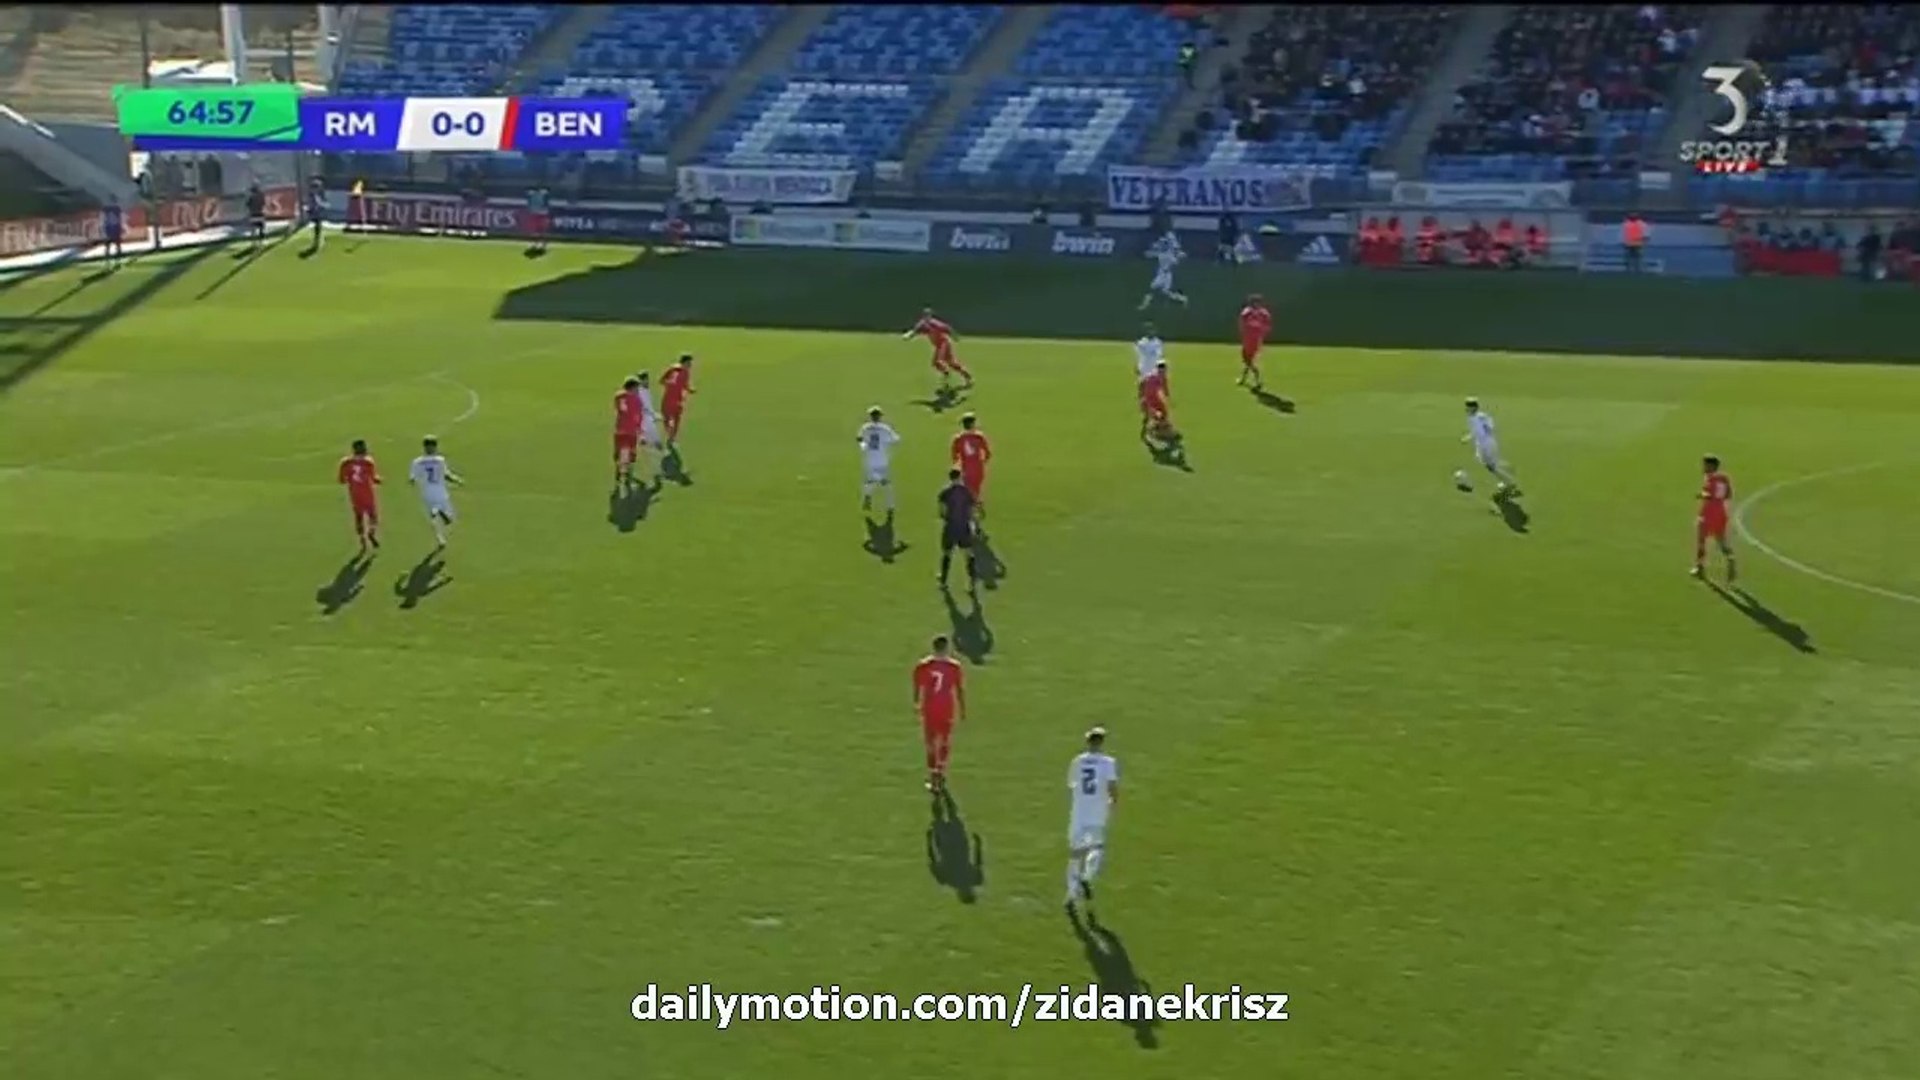 Real Madrid U19 2-0 Benfica U19 HD - All Goals and Highlights 08.03.2016  Youth League - video Dailymotion